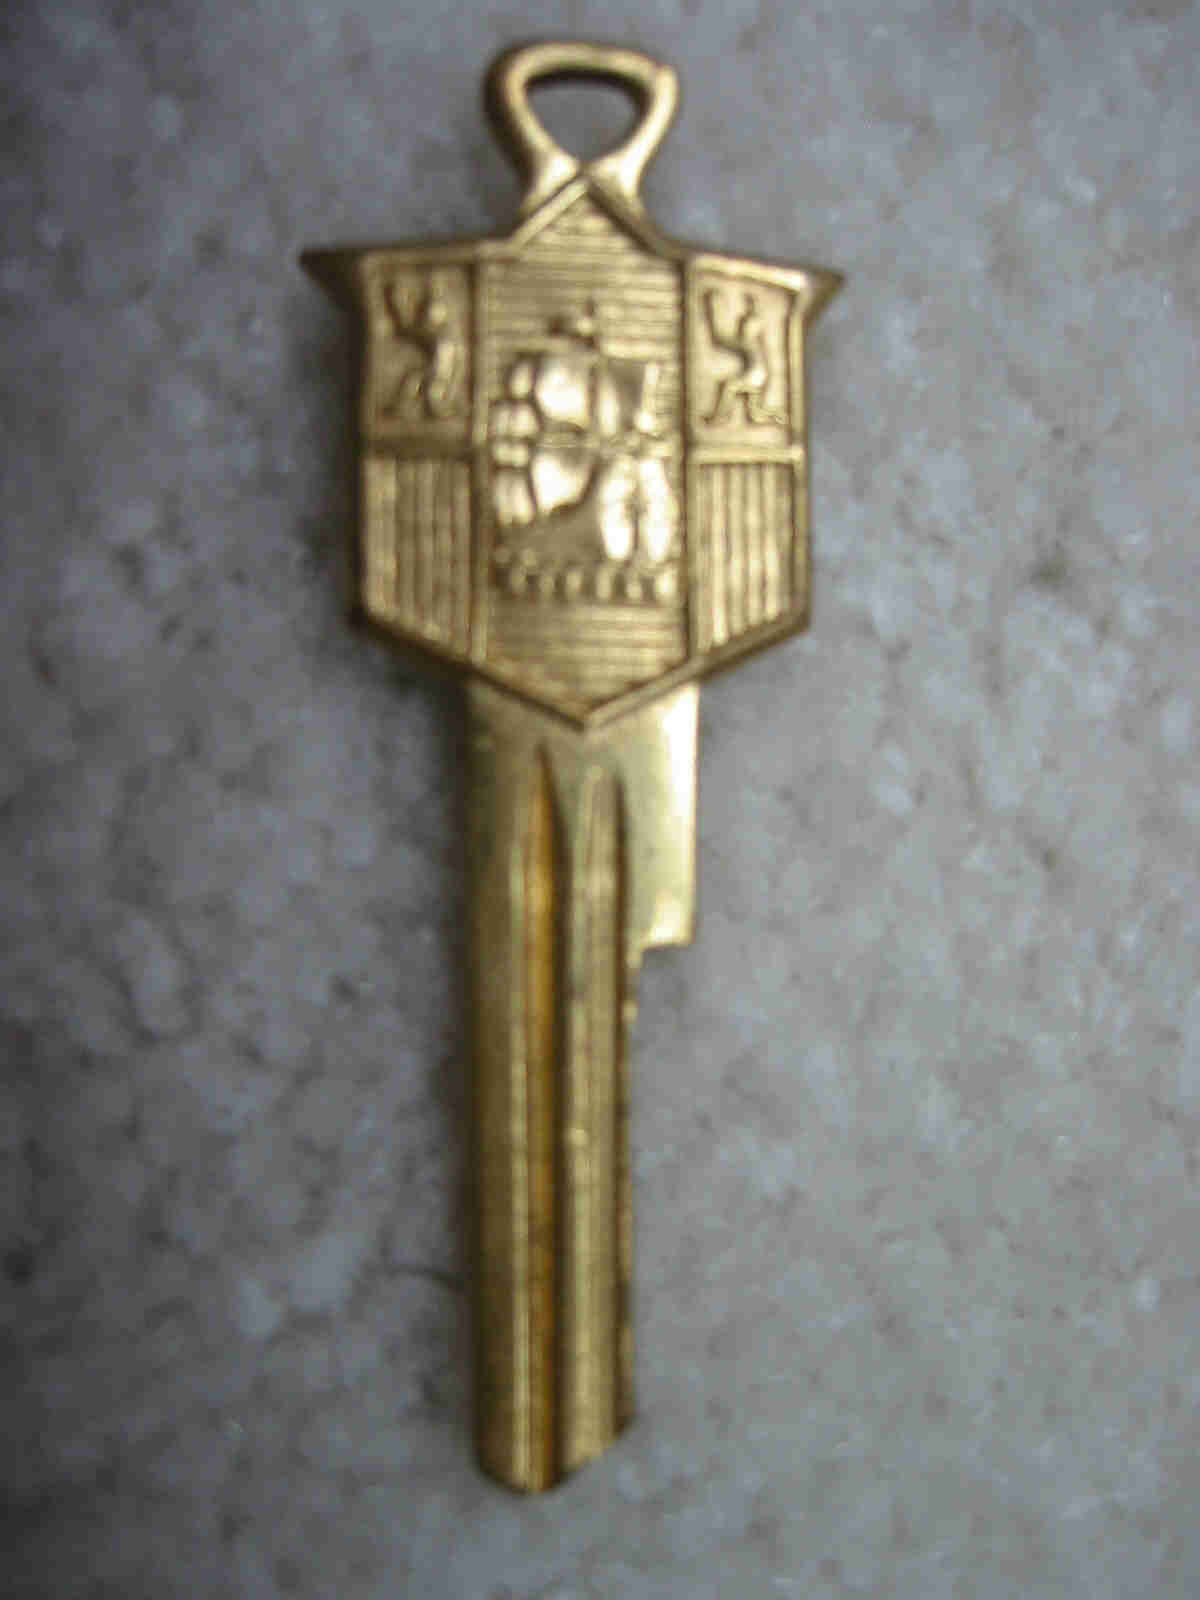 Plymouth Crest Key Blank - 1941 and Up (G)